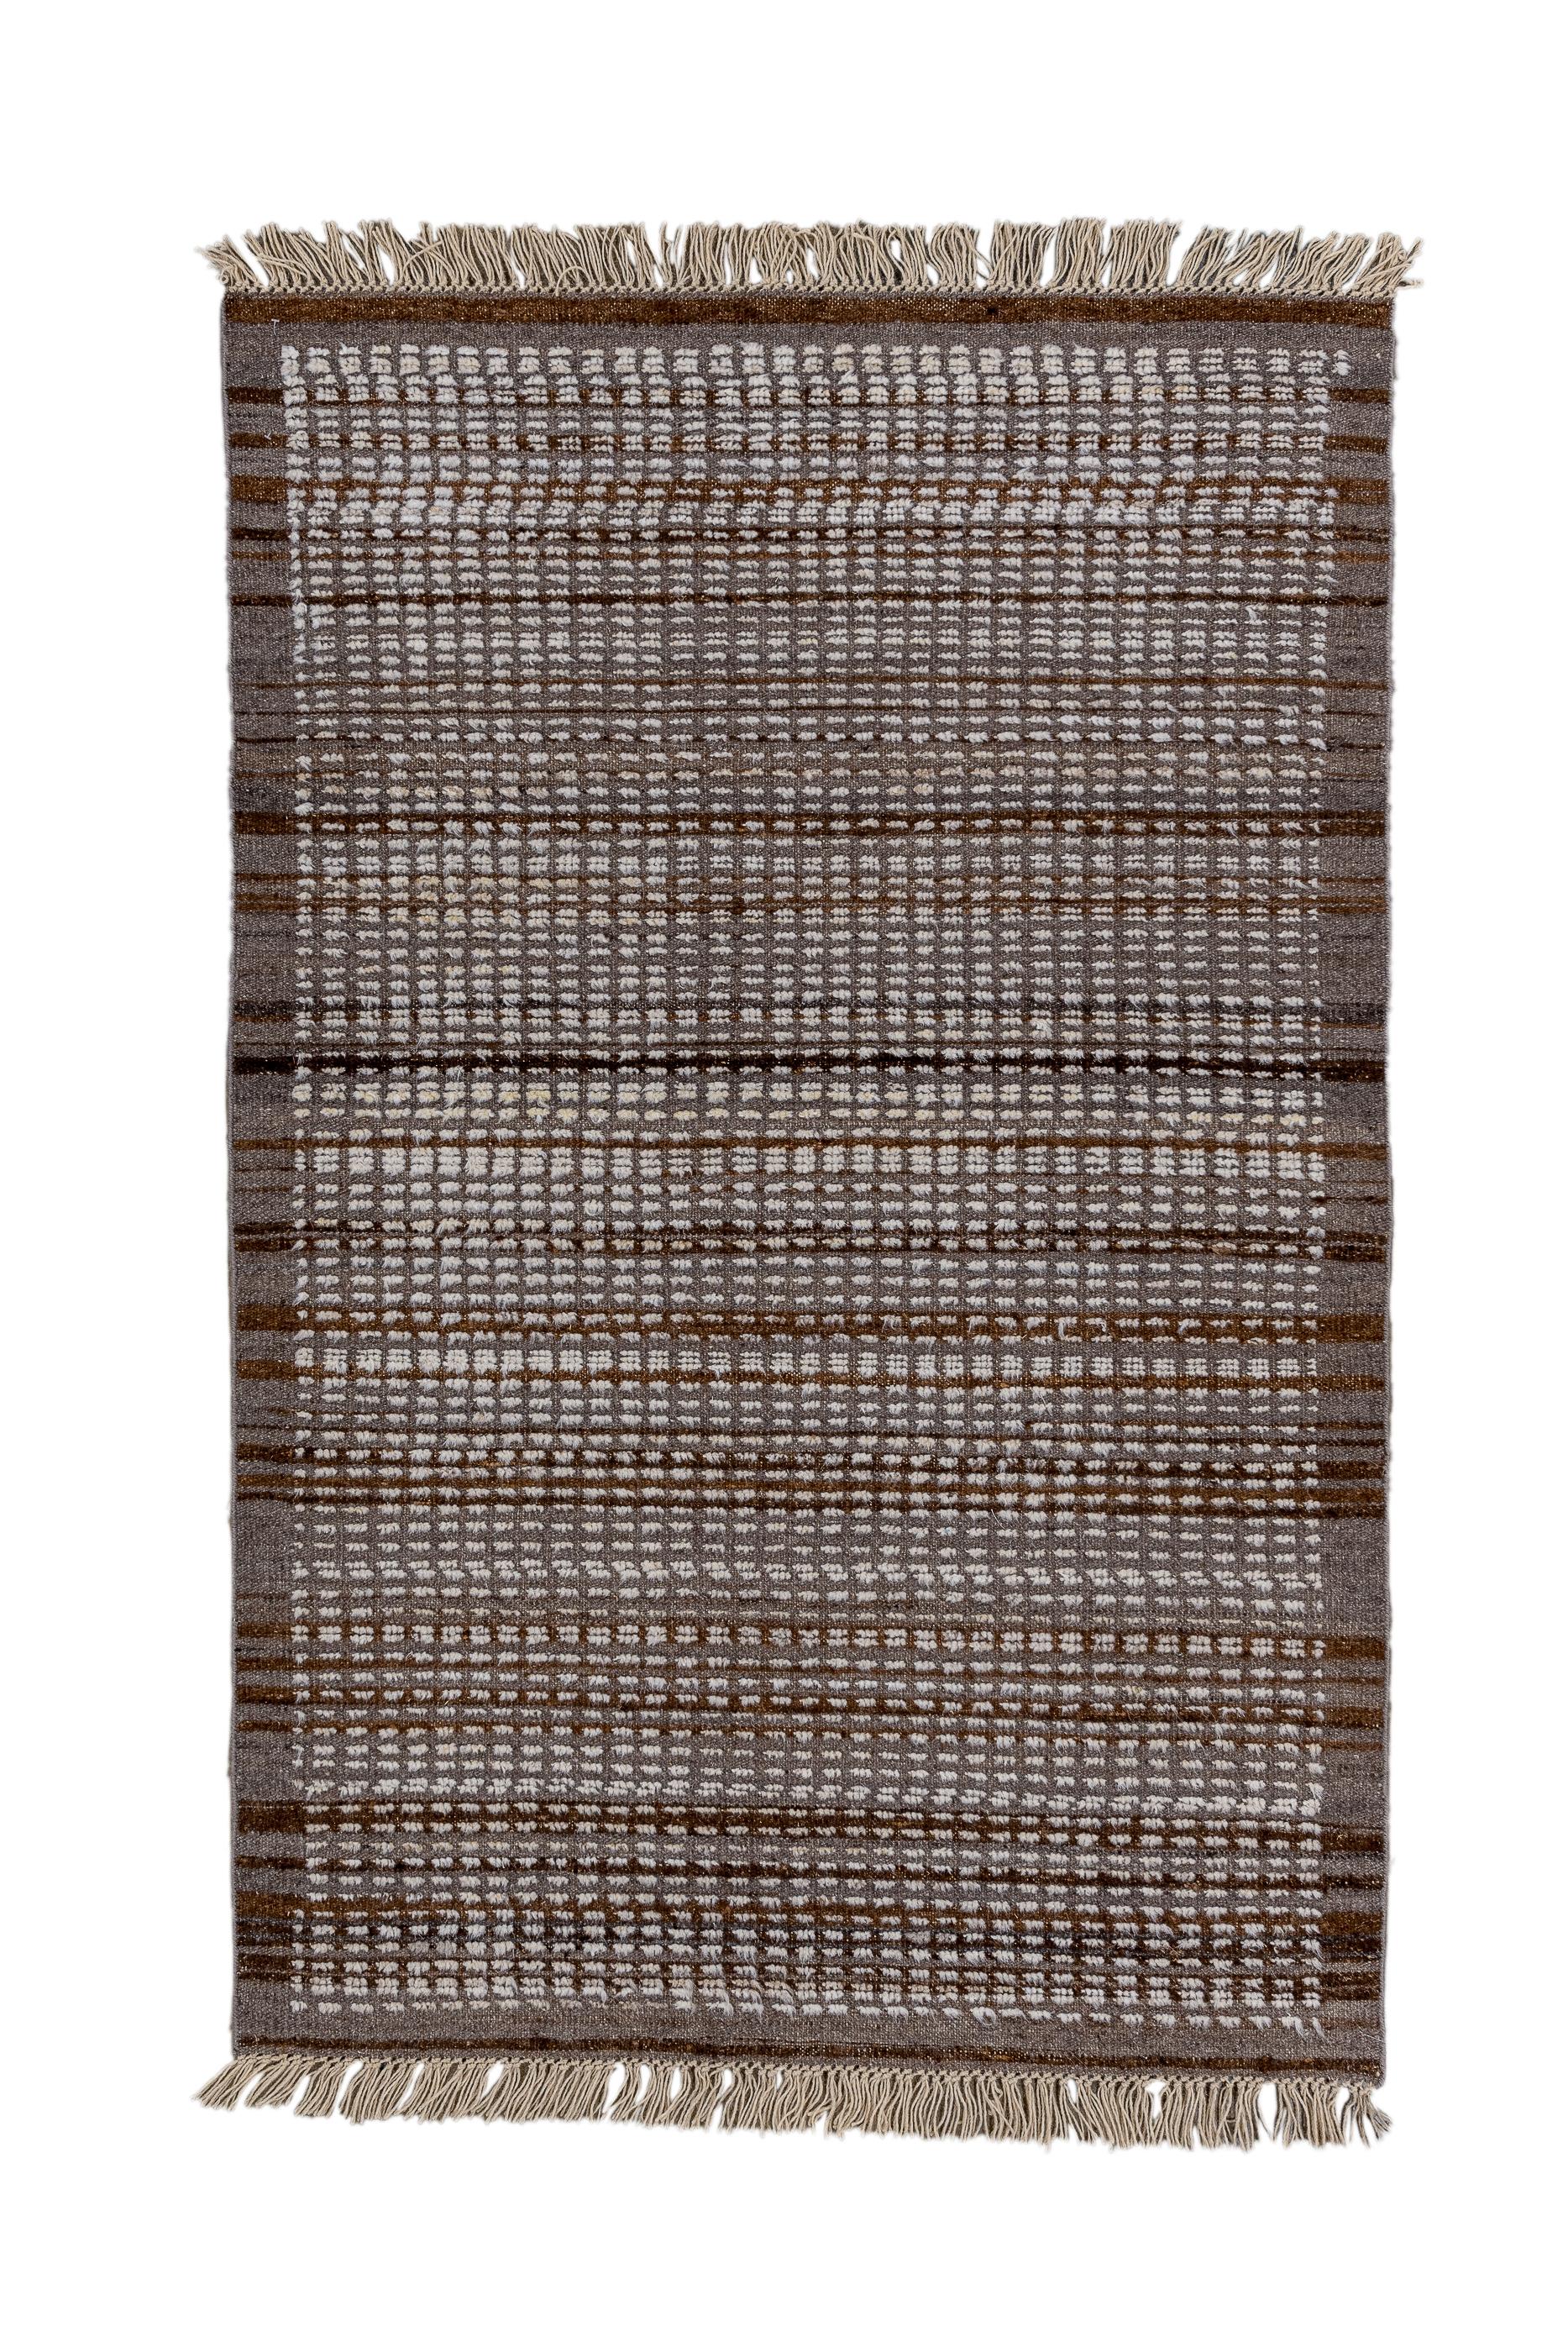 This coarse weave village piece shows an irregular allover design of ecru dashes in a conforming small, rectangular lattice, giving a ribbed over pattern. Dark brown medium width border. All wool. An authentic, easy to live with rug with plenty of